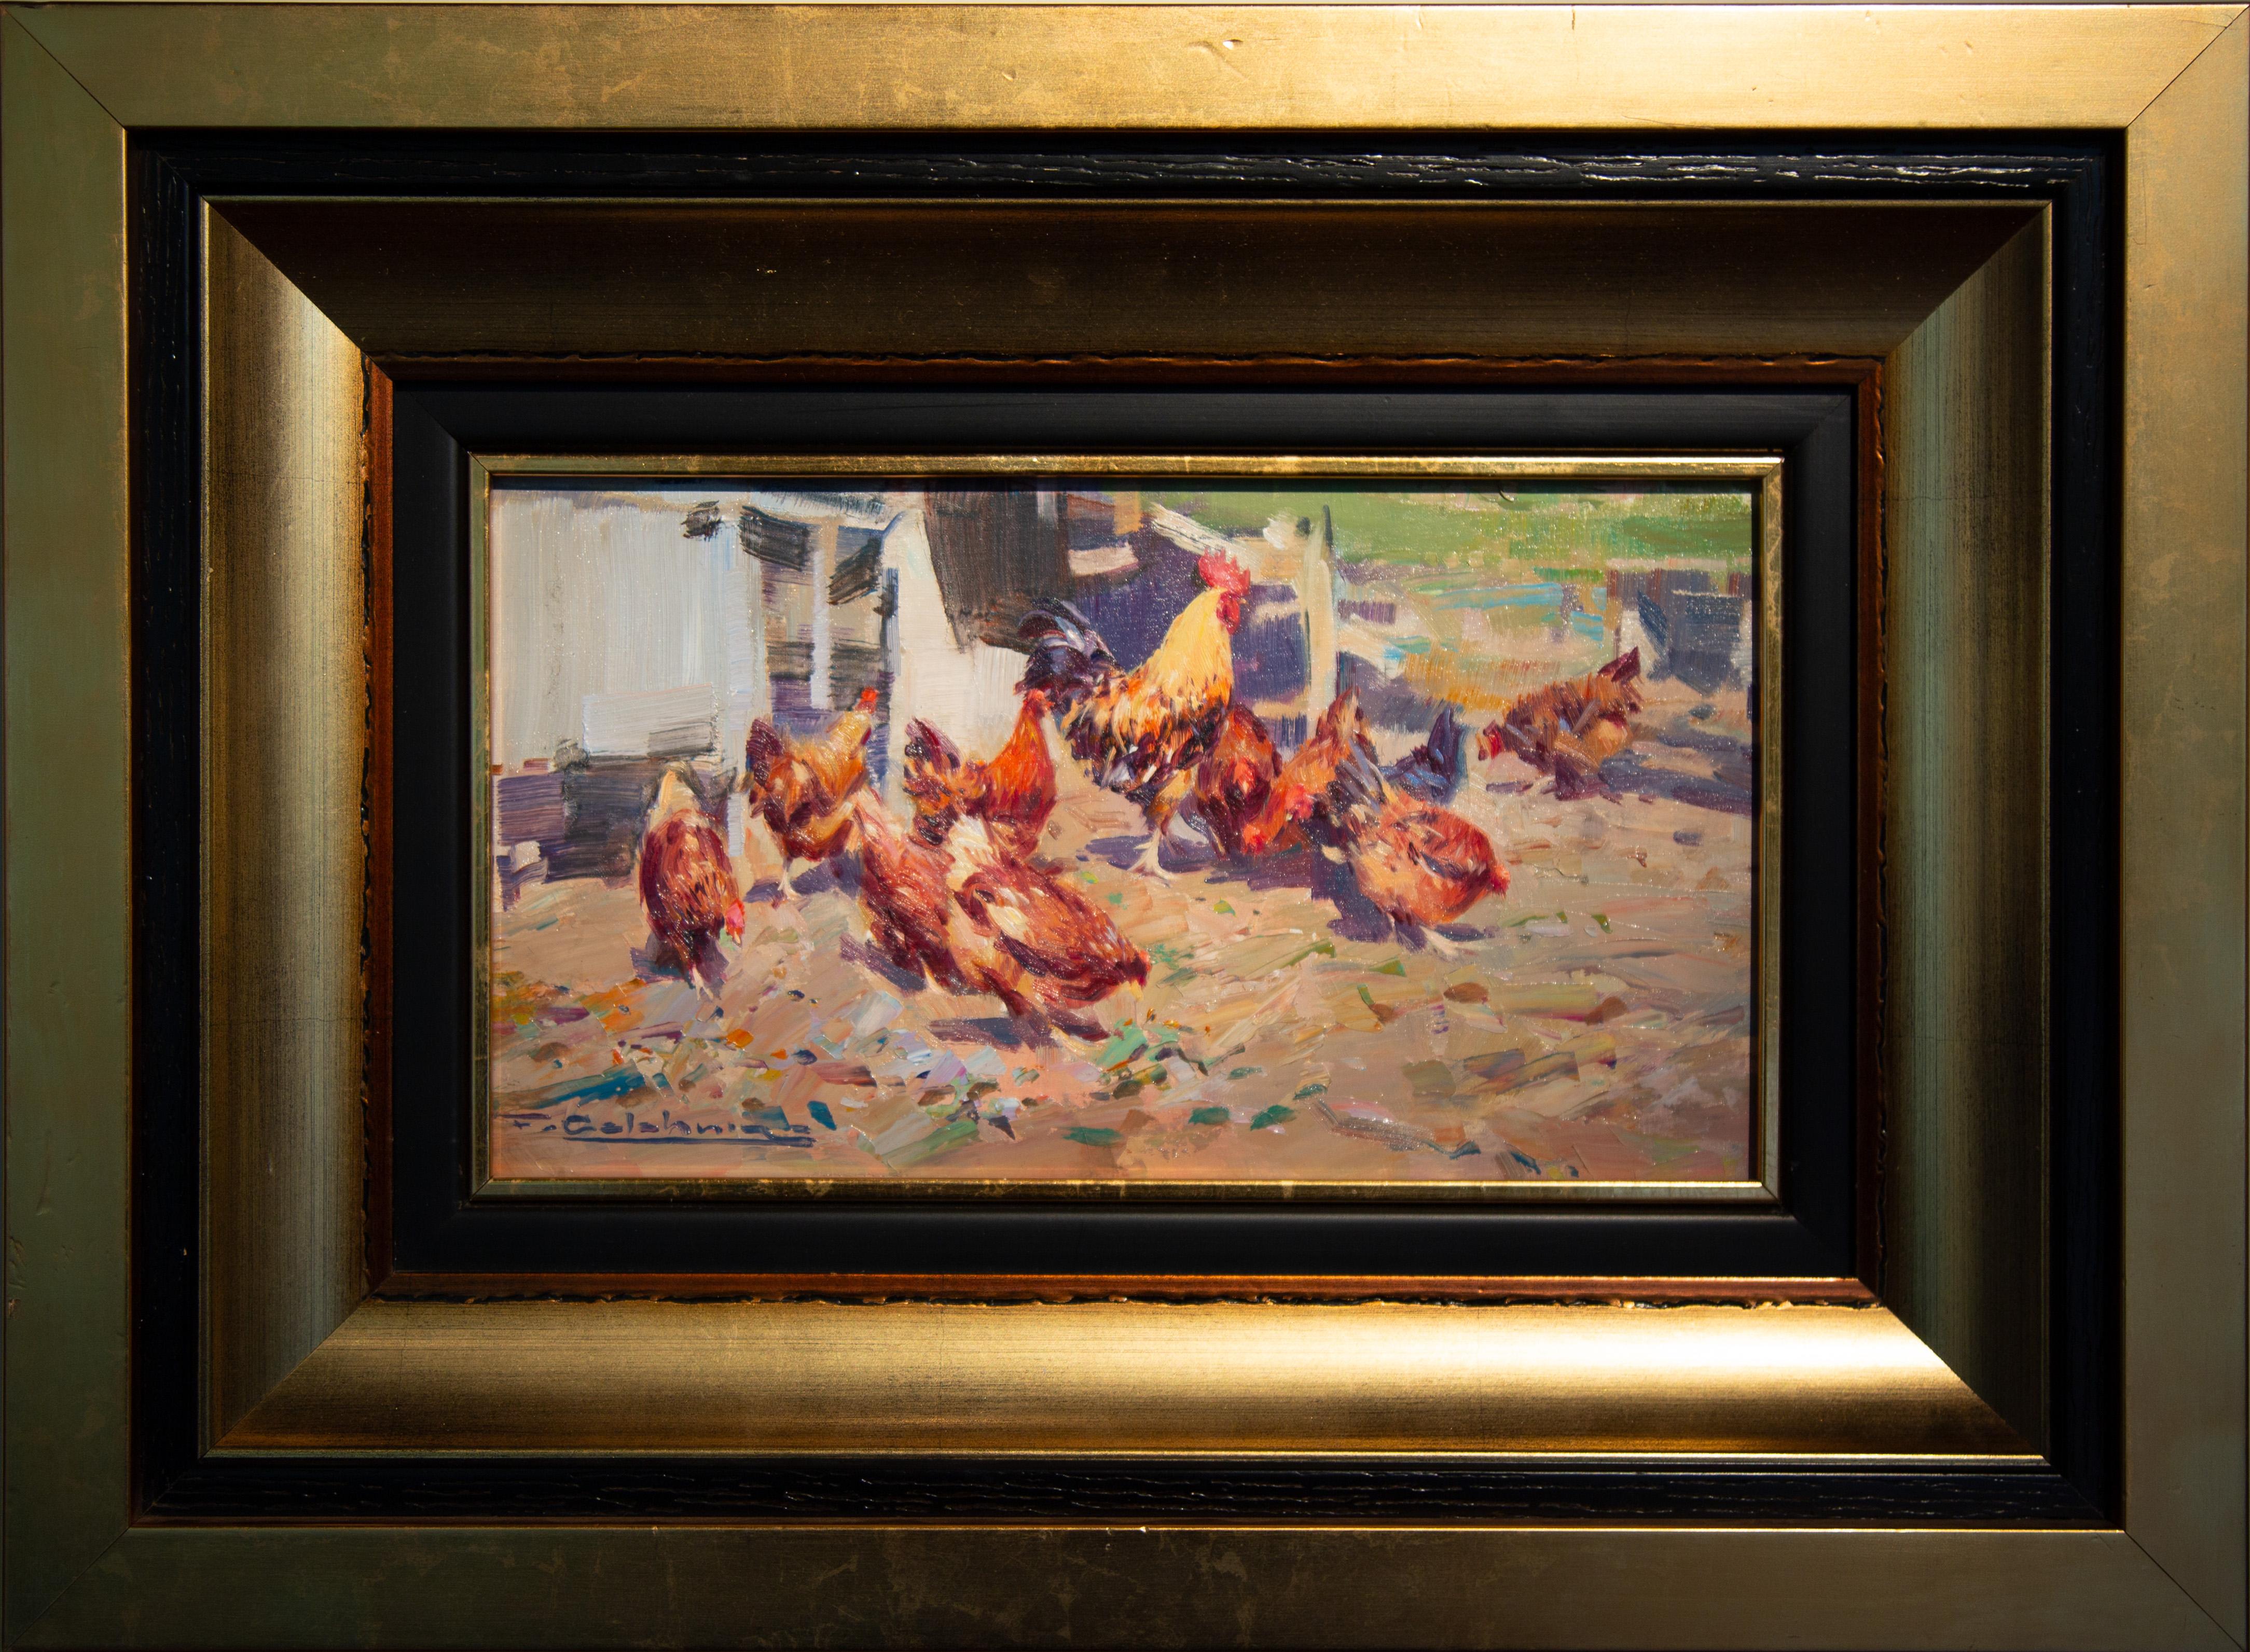 Francisco Calabuig Animal Painting - 'The Farmyard' Contemporary painting of chickens, cockerel in a farm setting